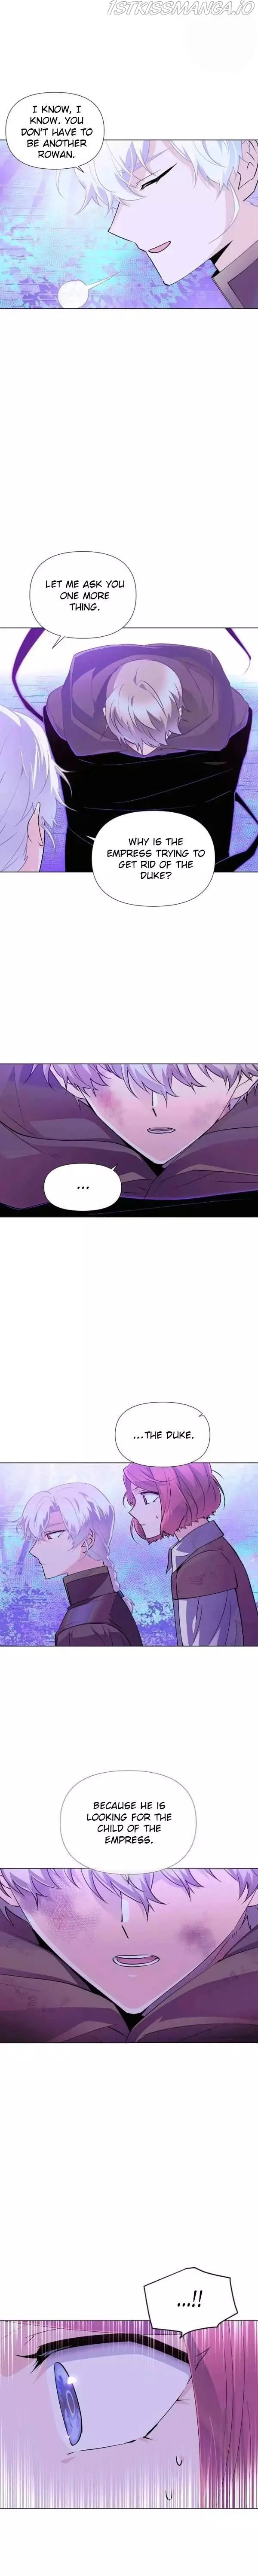 The Villain Discovered My Identity - 63 page 13